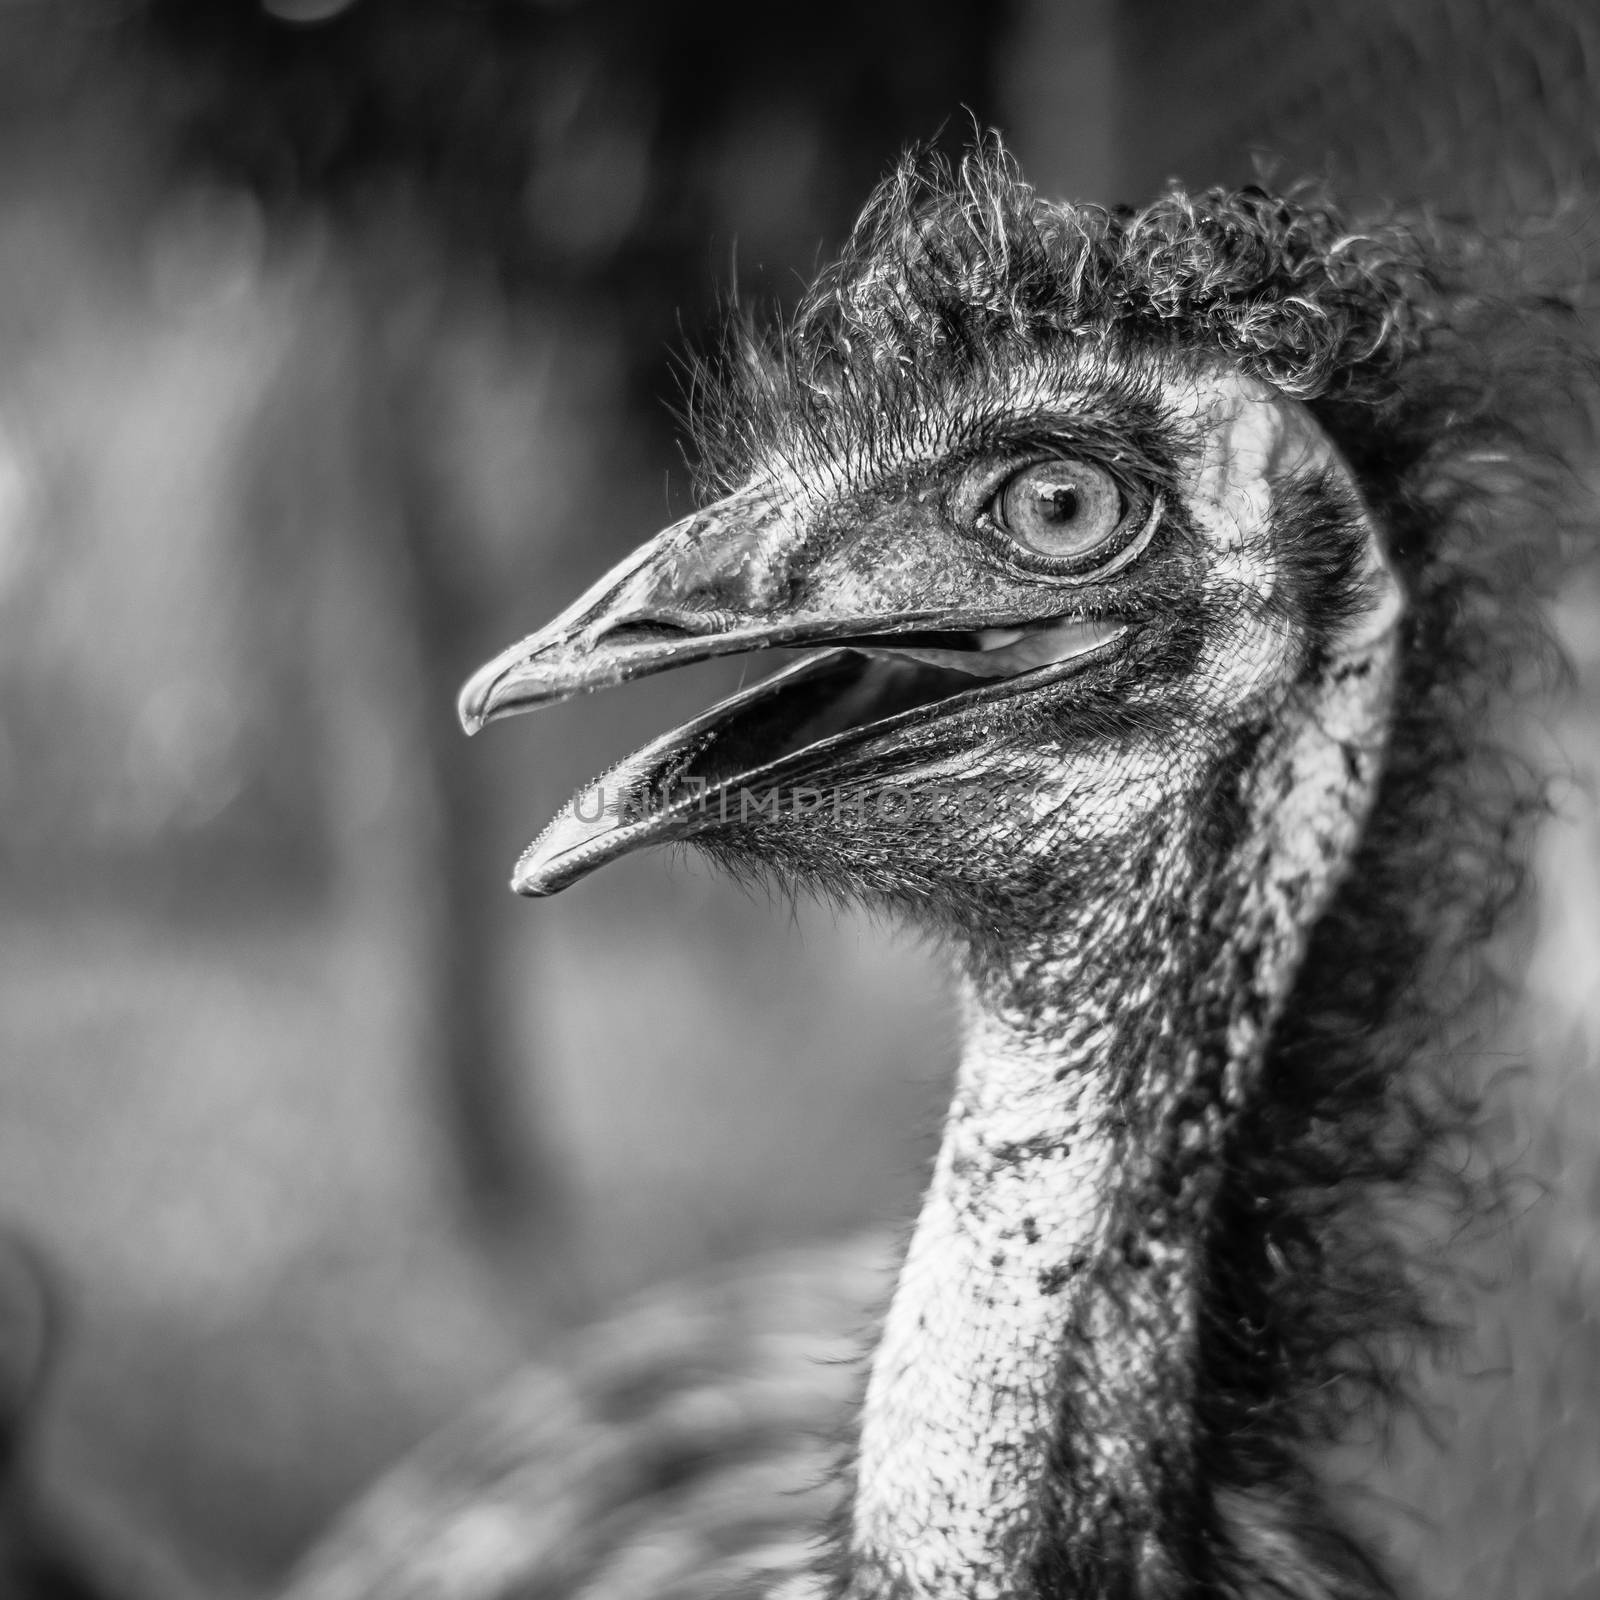 Emu by itself outdoors during the daytime. by artistrobd